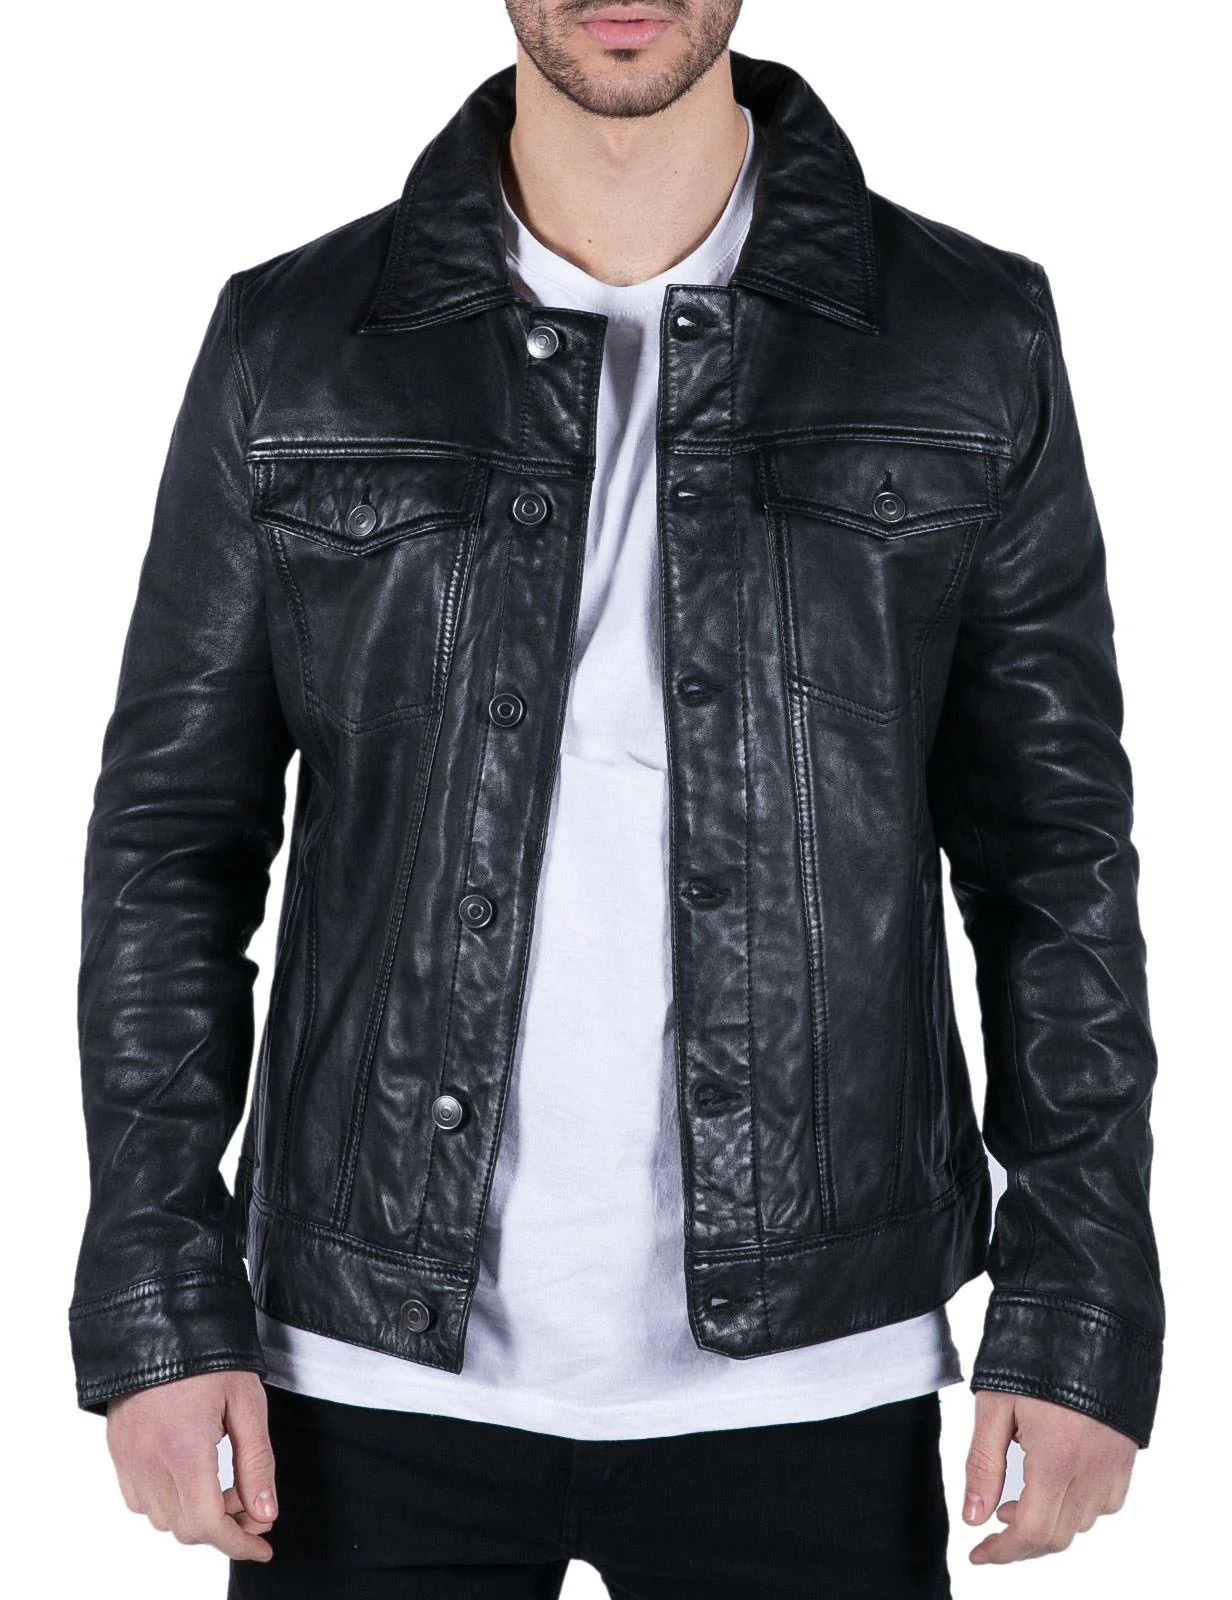 Denim Fabric Motorcycle Jacket PMJ Promo Jeans MIAMI For Sale Online -  Outletmoto.eu